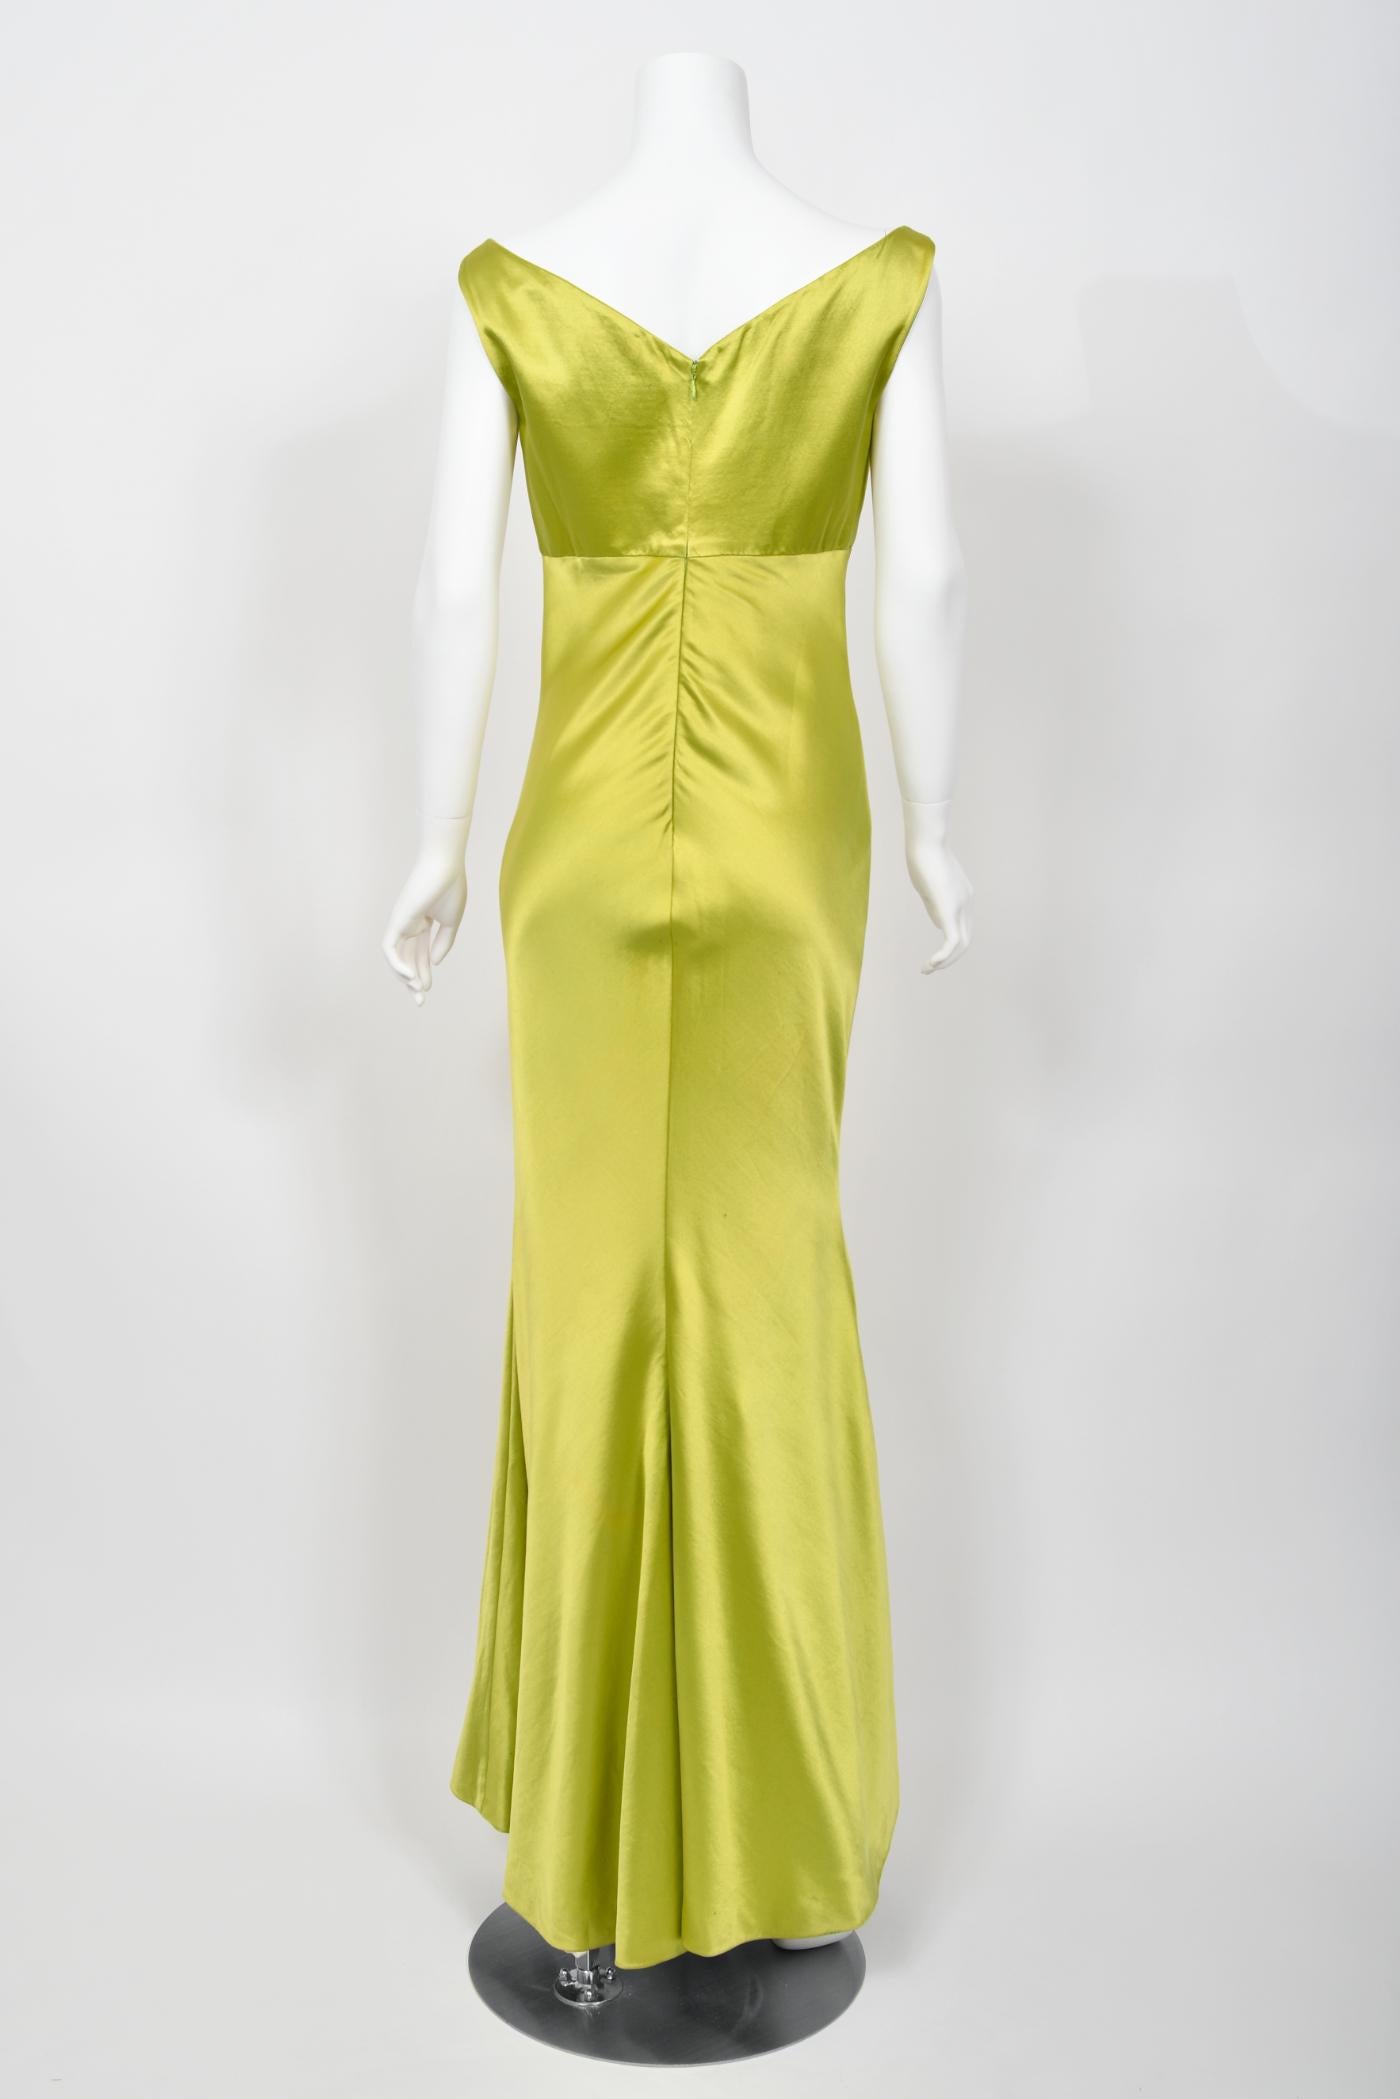 1995 Gianni Versace Couture Documented Runway Chartreuse Silk Off-Shoulder Gown For Sale 13